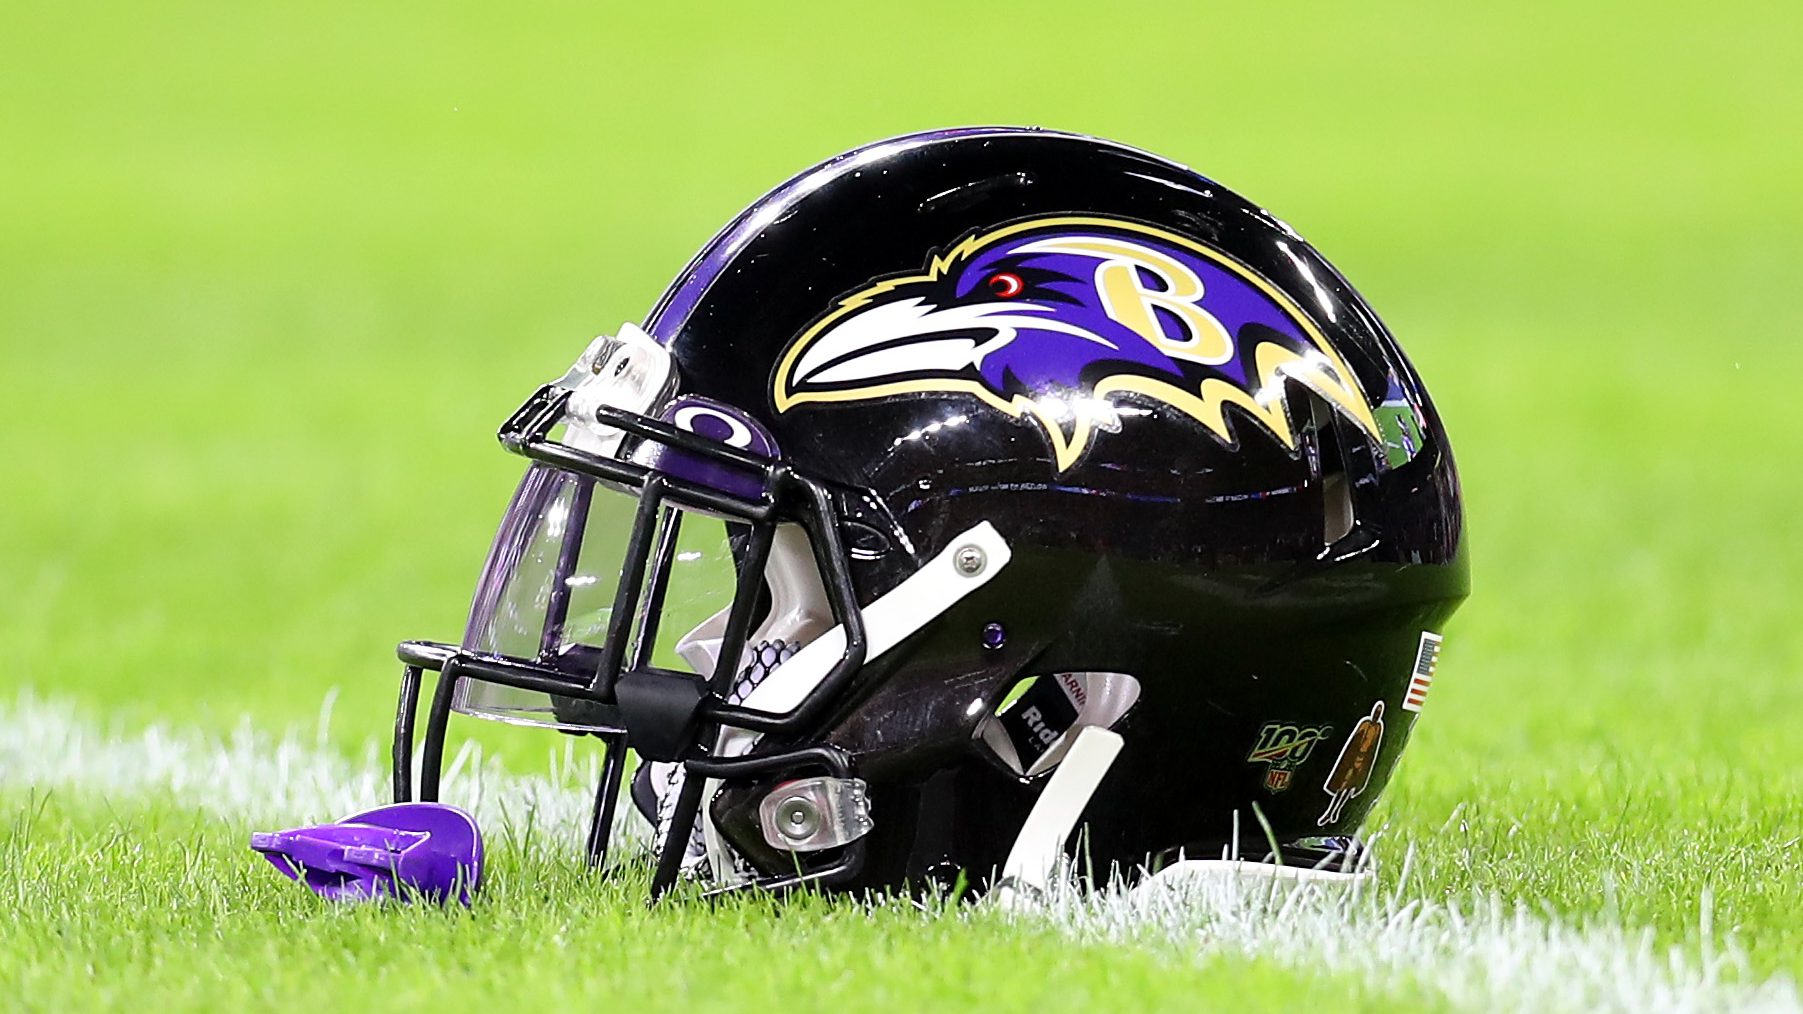 Ravens Reveal Powerful Statement on Social Justice Reform | Heavy.com